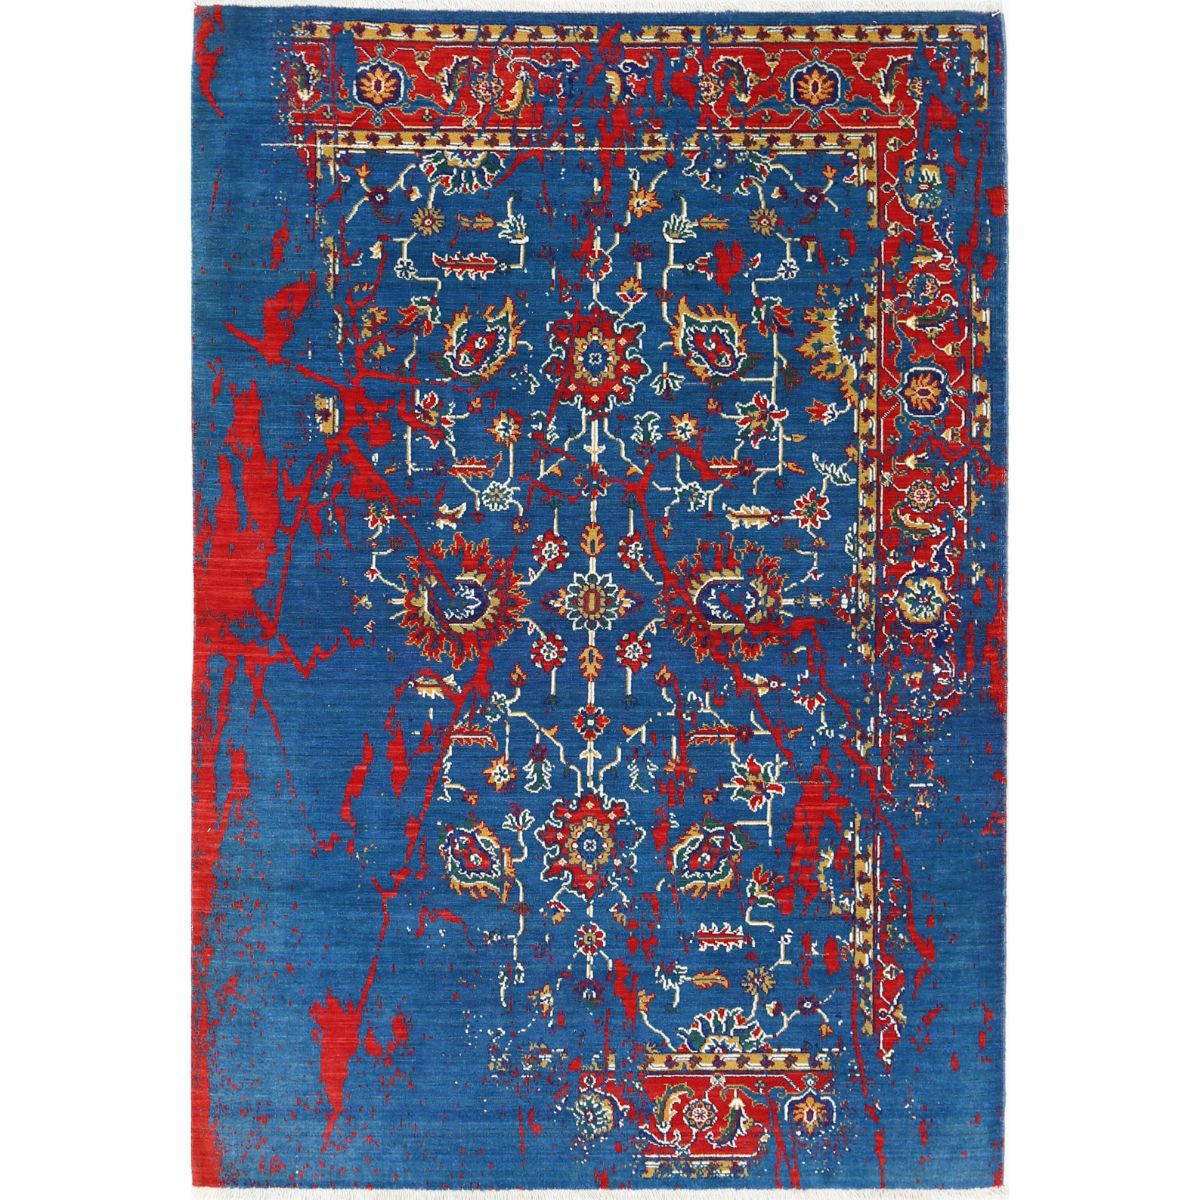 Gulshan Collection Powered Loomed Blue 3'3" X 5'9" Rectangle Gulshan Design Wool Rug